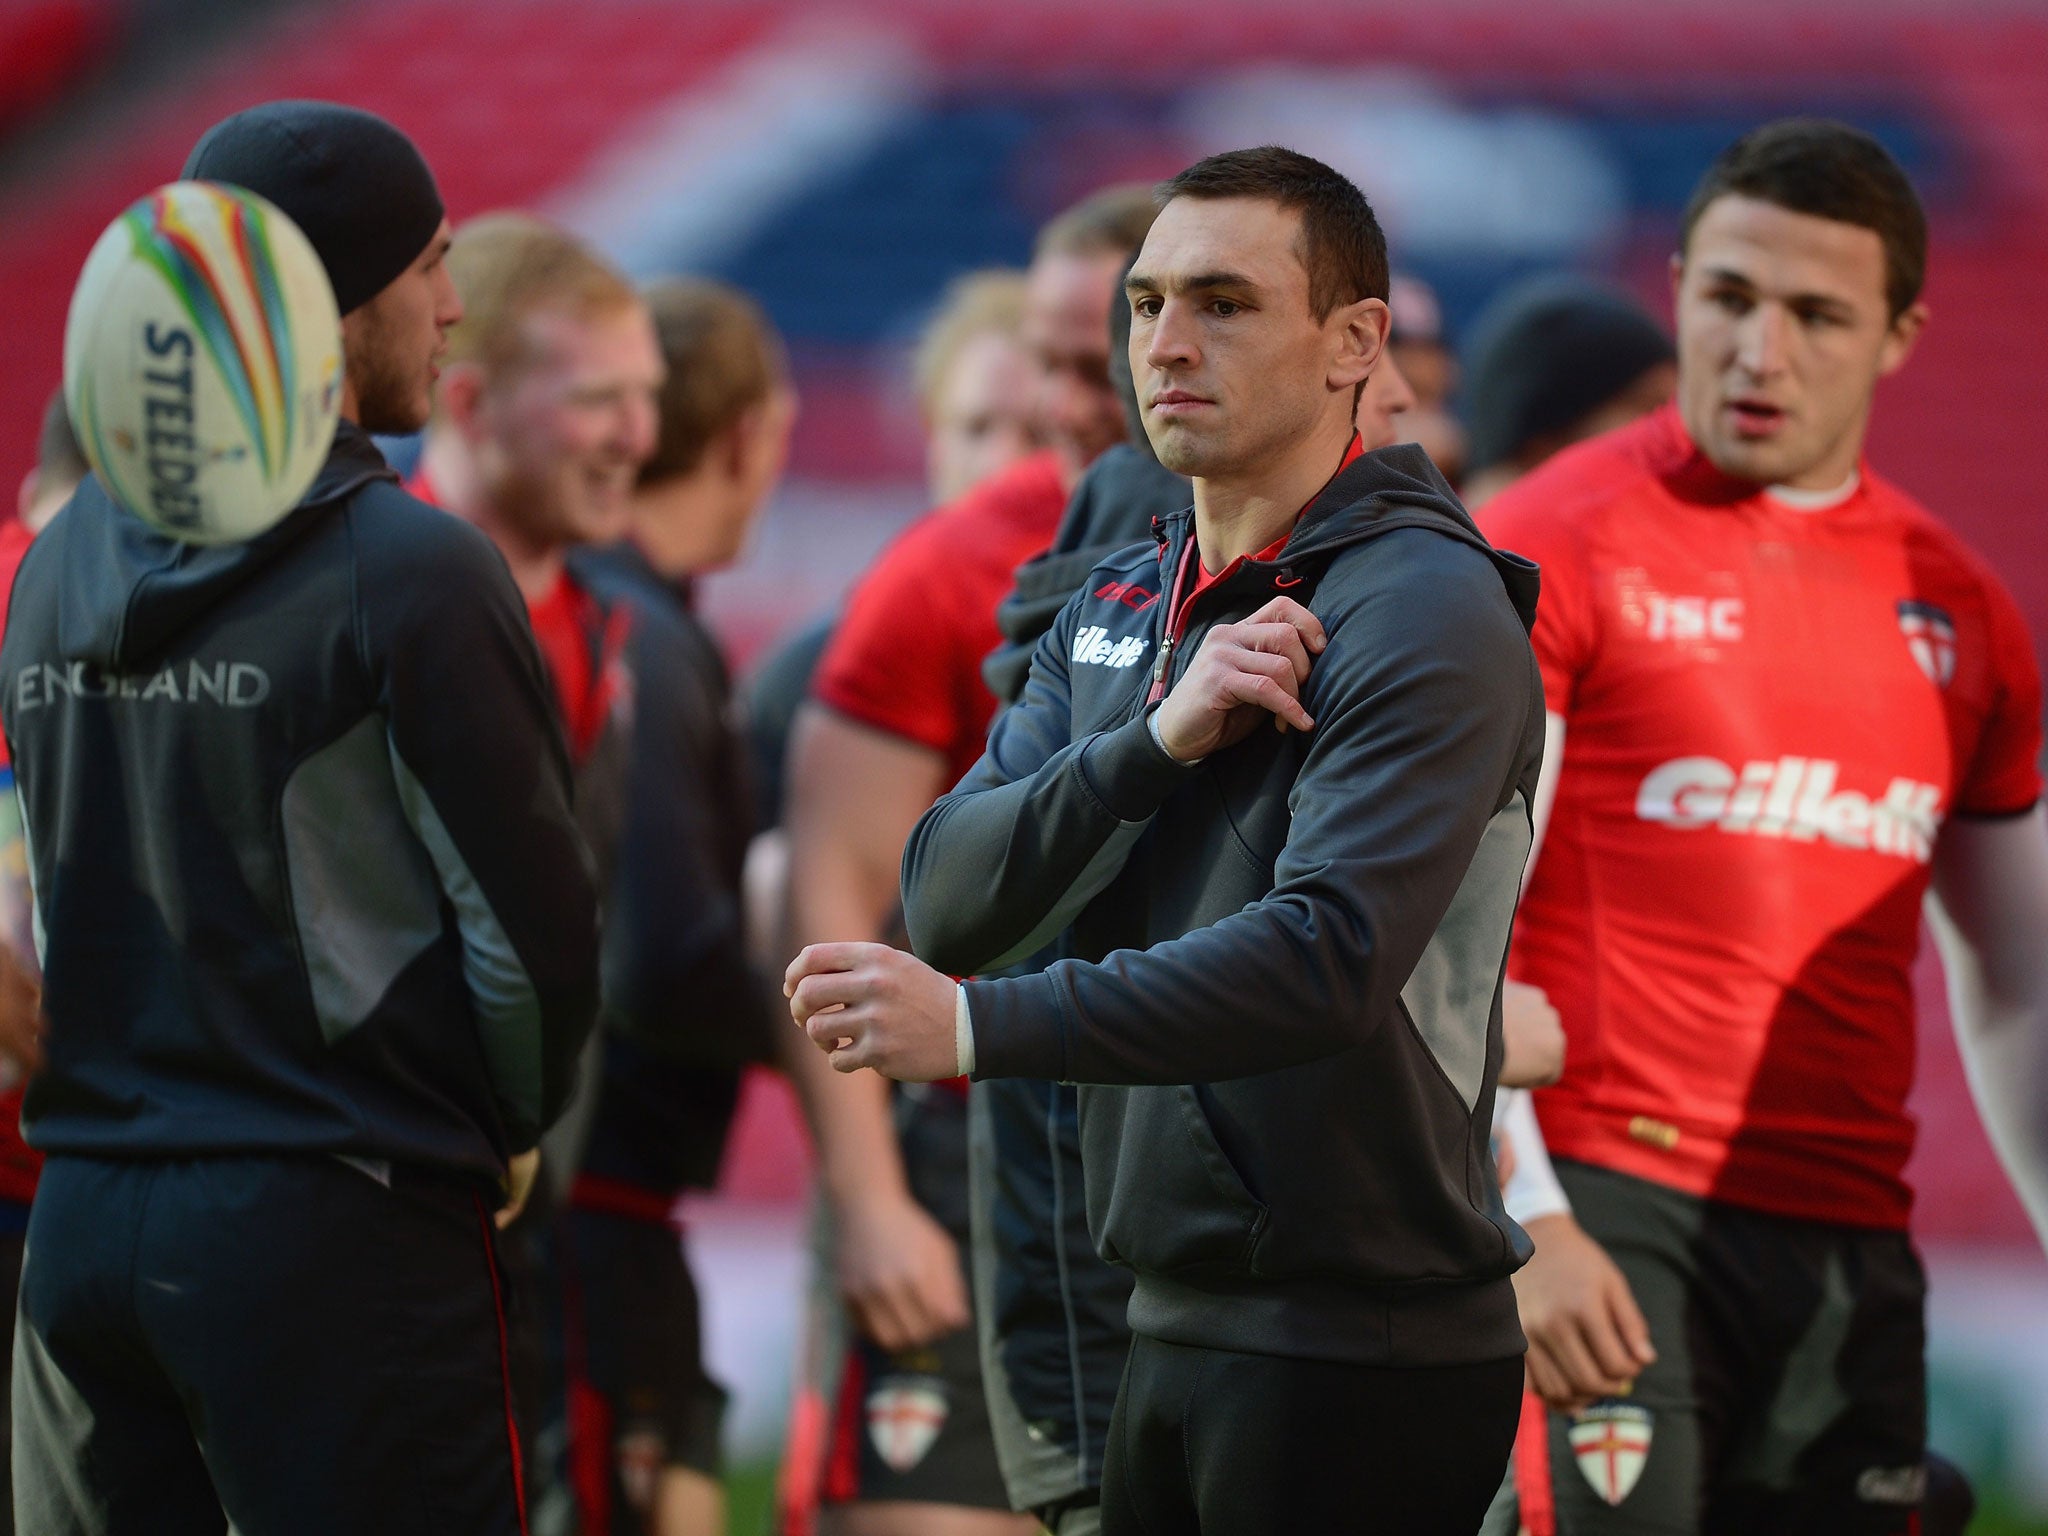 England captain Kevin Sinfield training at Wembley